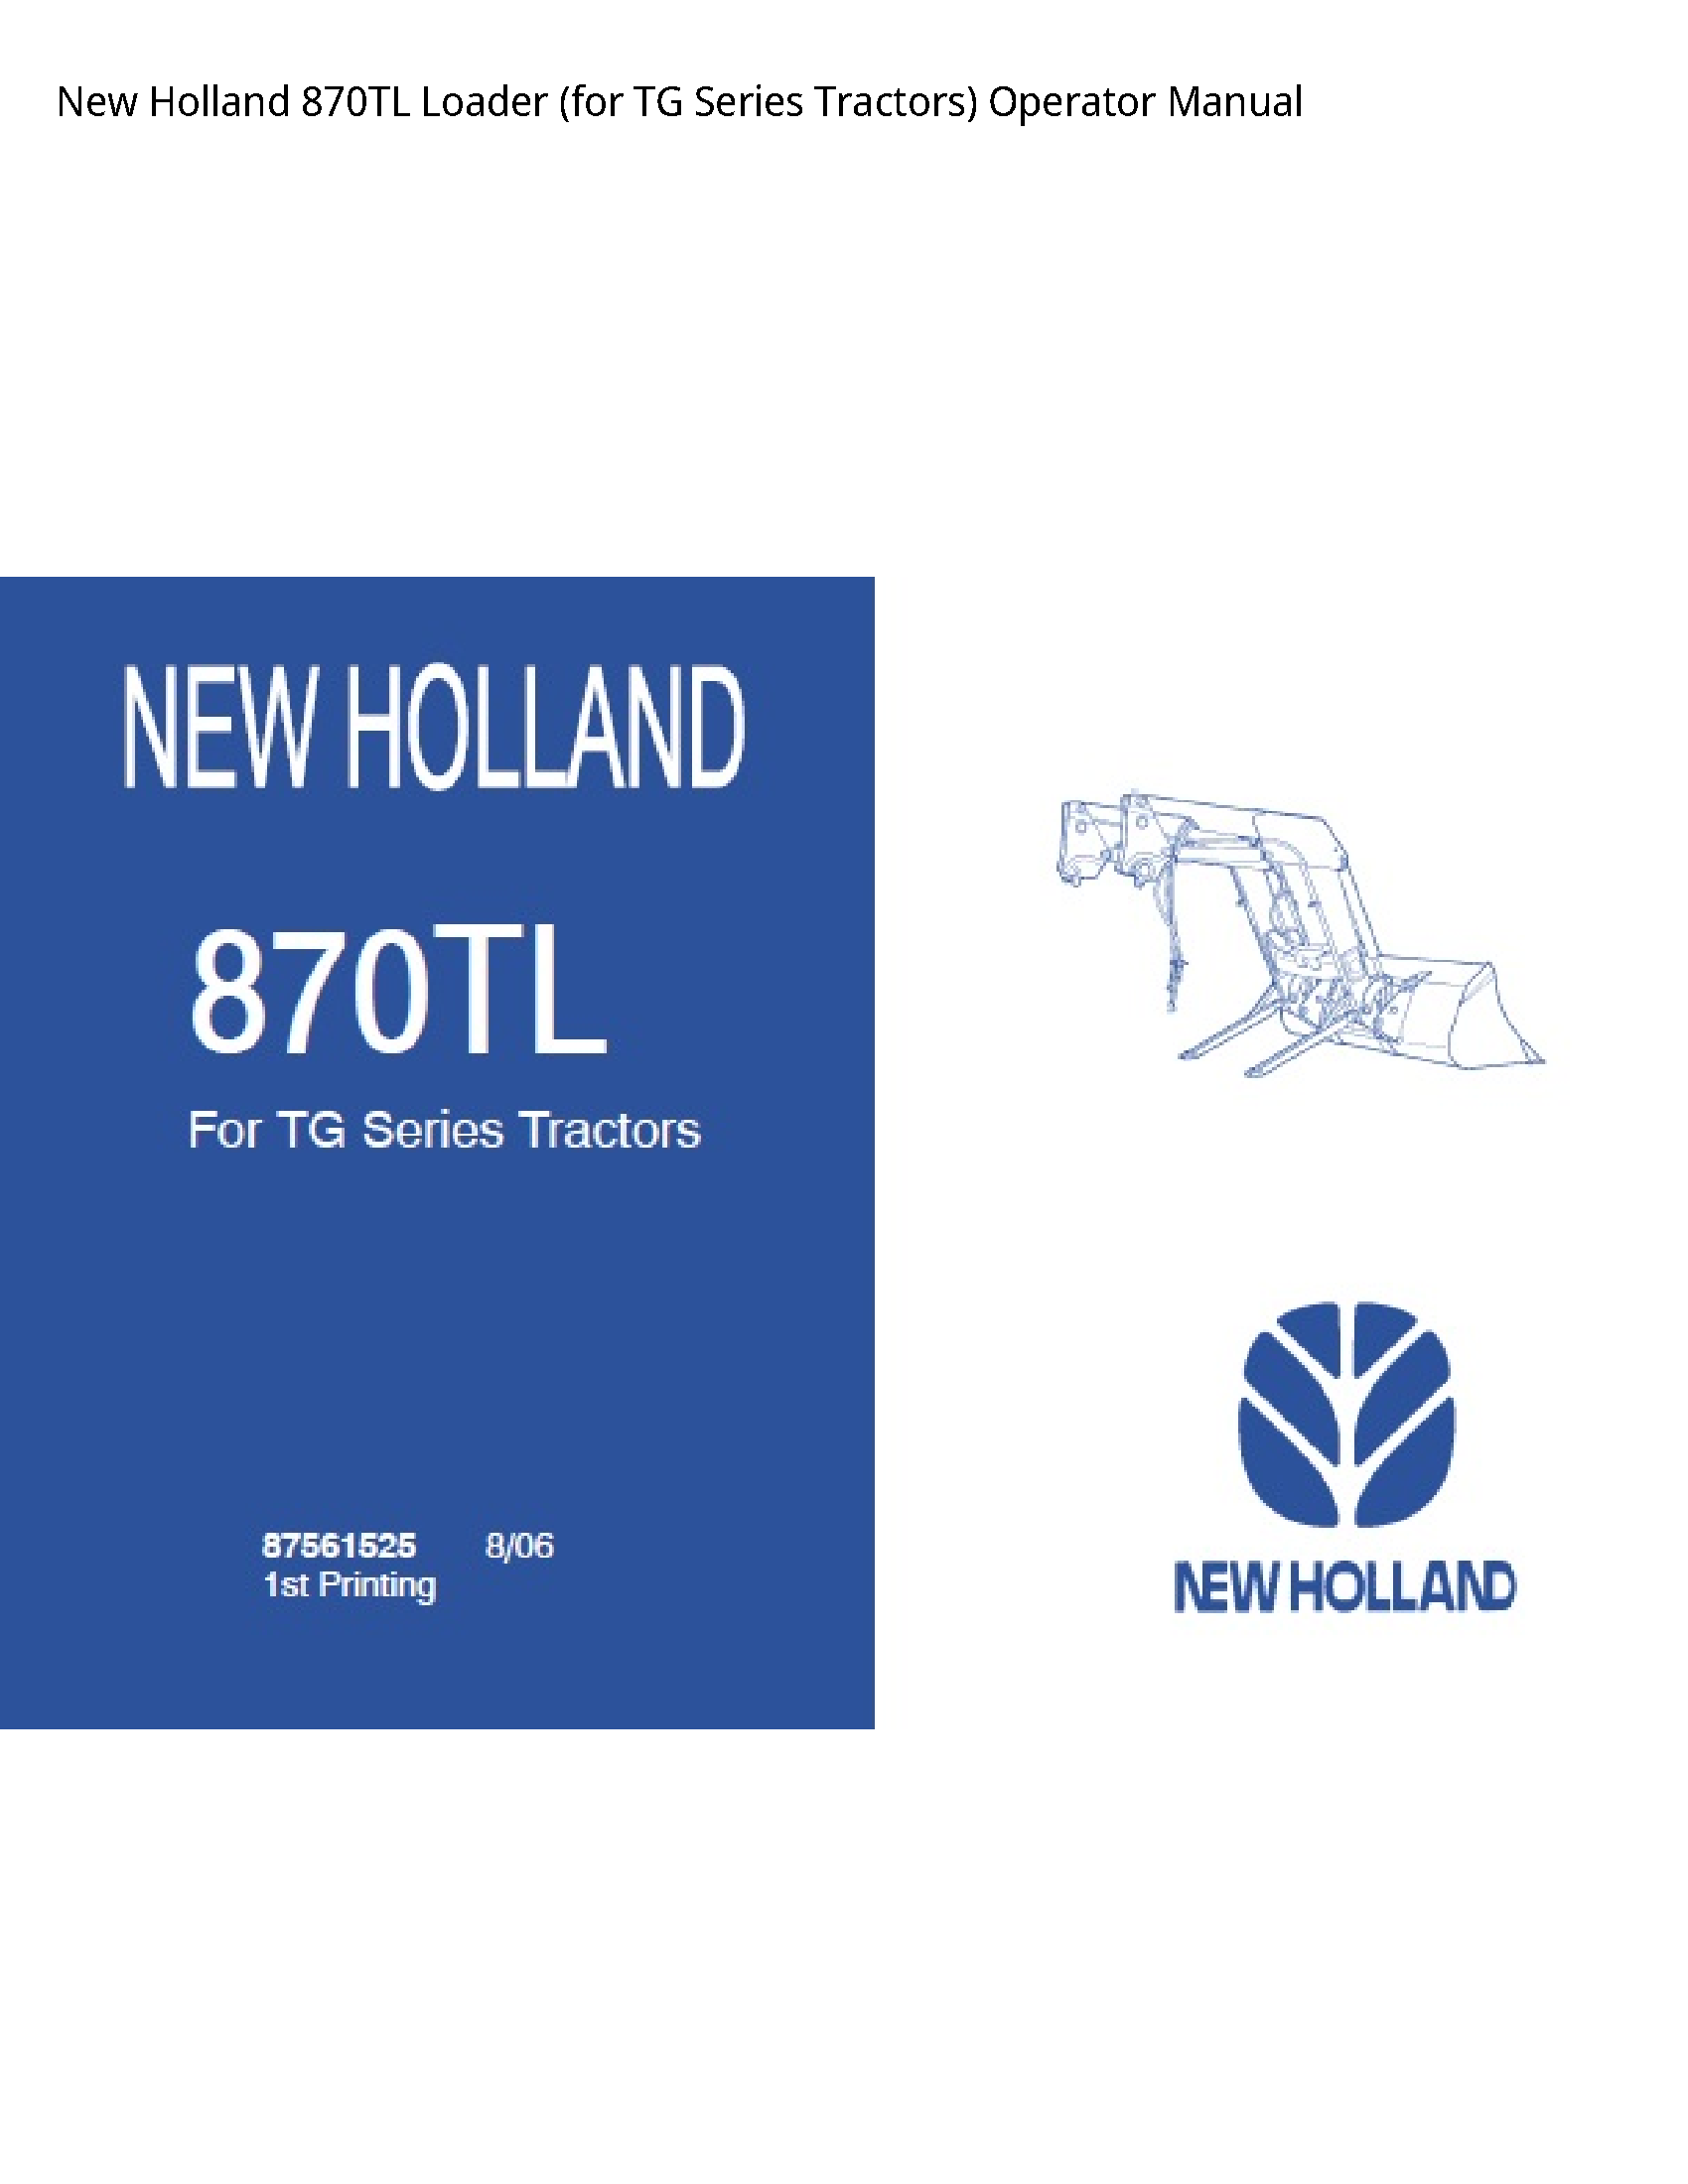 New Holland 870TL Loader (for TG Series Tractors) Operator manual